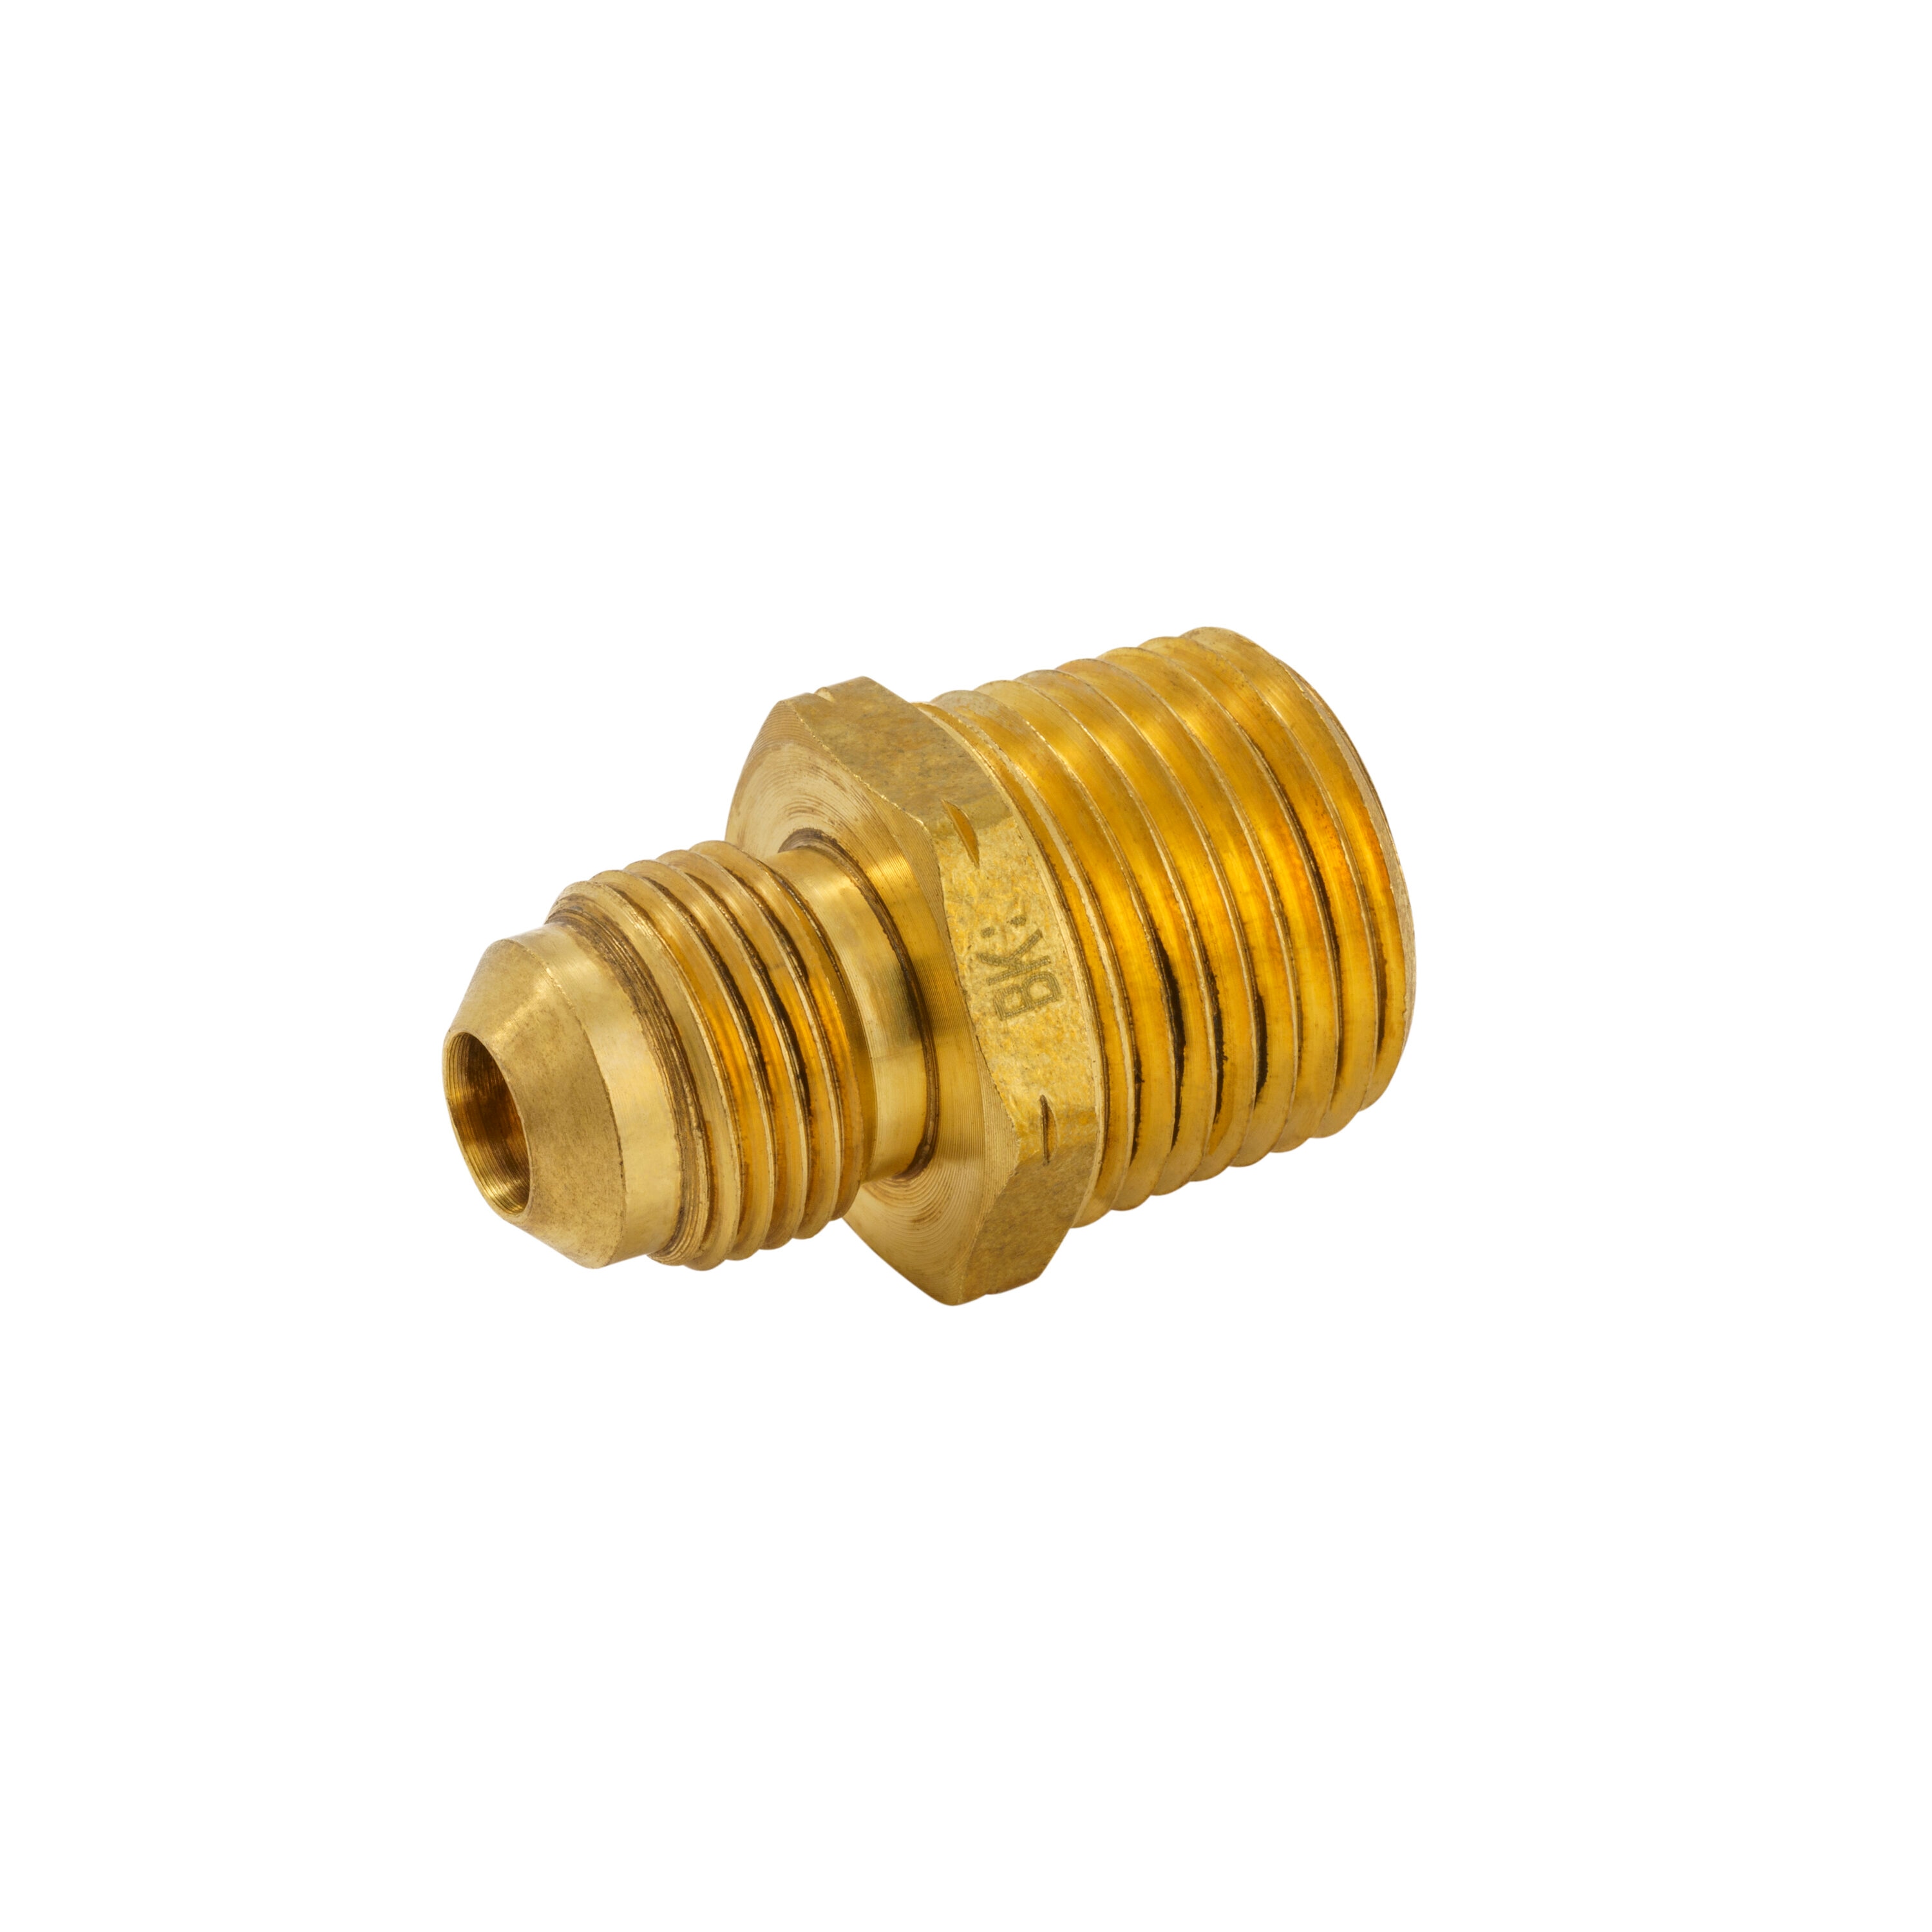 Union Brass Fittings at